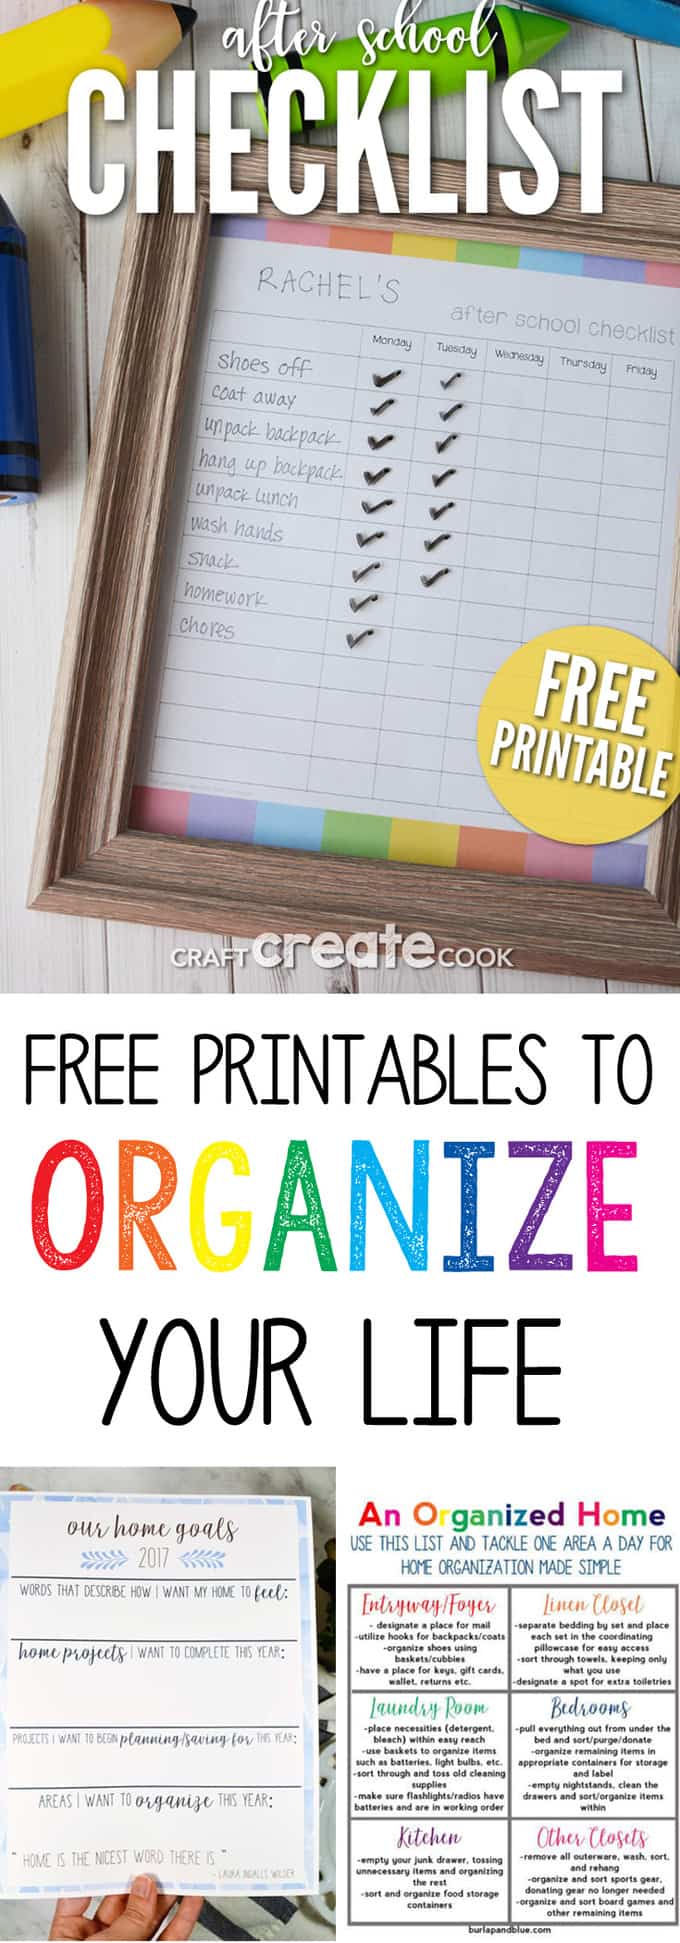 Free Printables to Help You Organize Every Aspect of Your Life